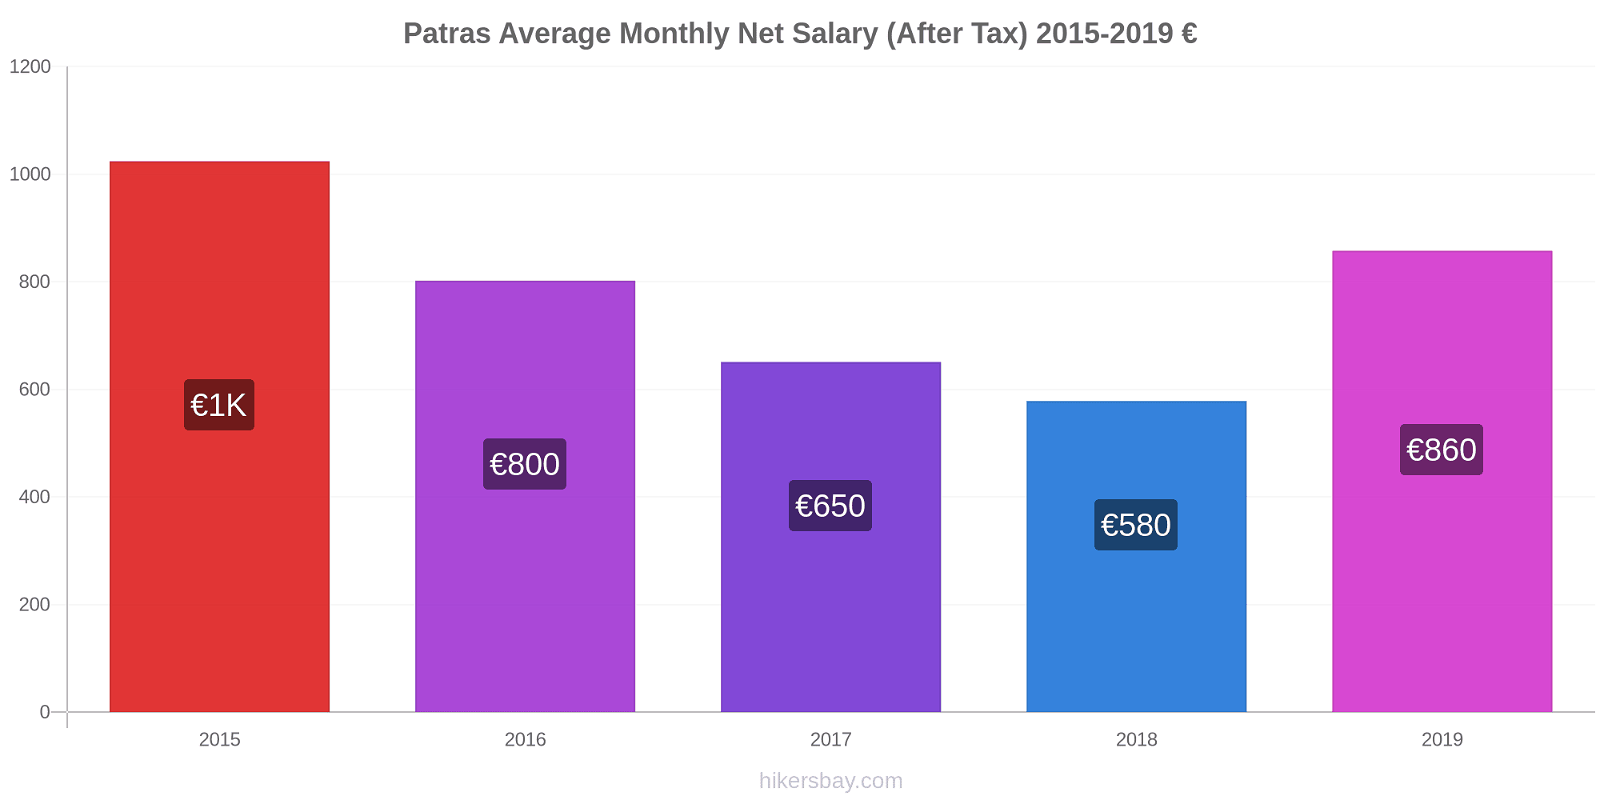 Patras price changes Average Monthly Net Salary (After Tax) hikersbay.com